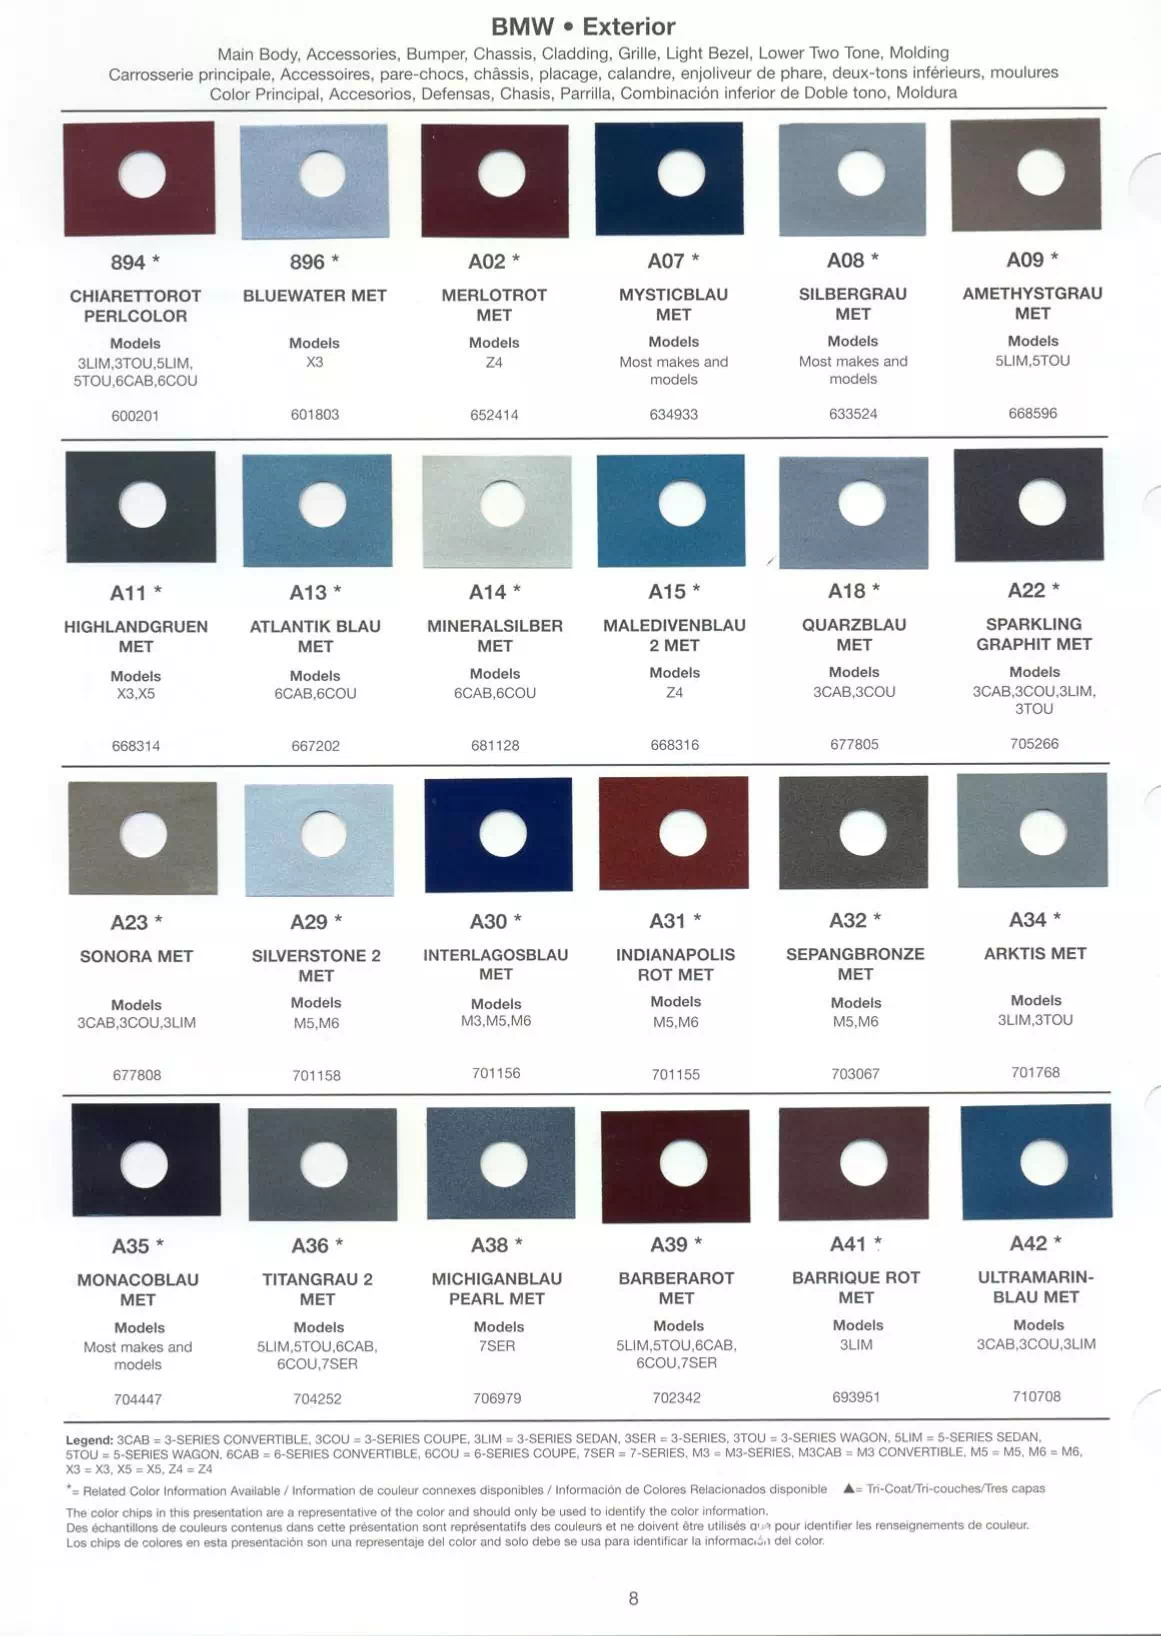 Paint codes for interior, exterior, accent & wheel colors to mix paint or order paint for 2006 bmw's